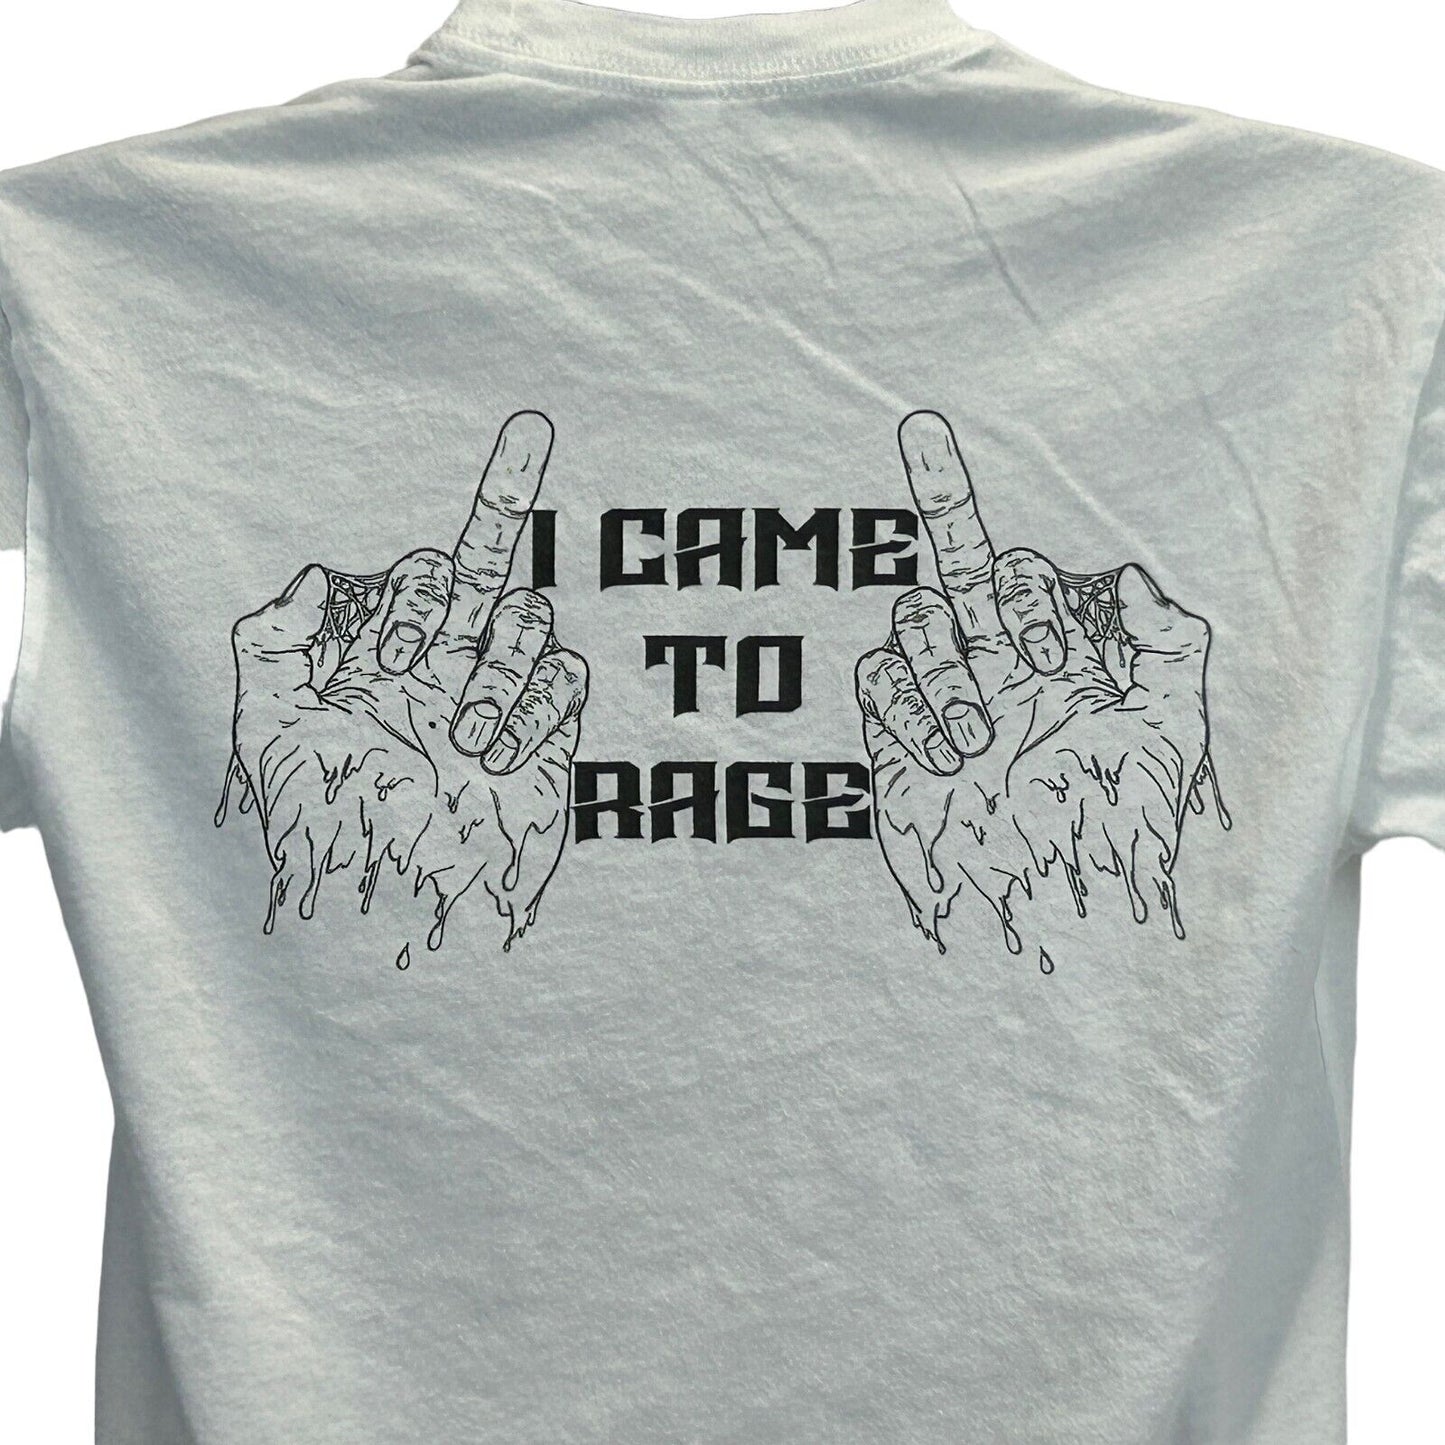 RMT I Came To Rage T Shirt Middle Finger White Cotton Graphic Tee Small